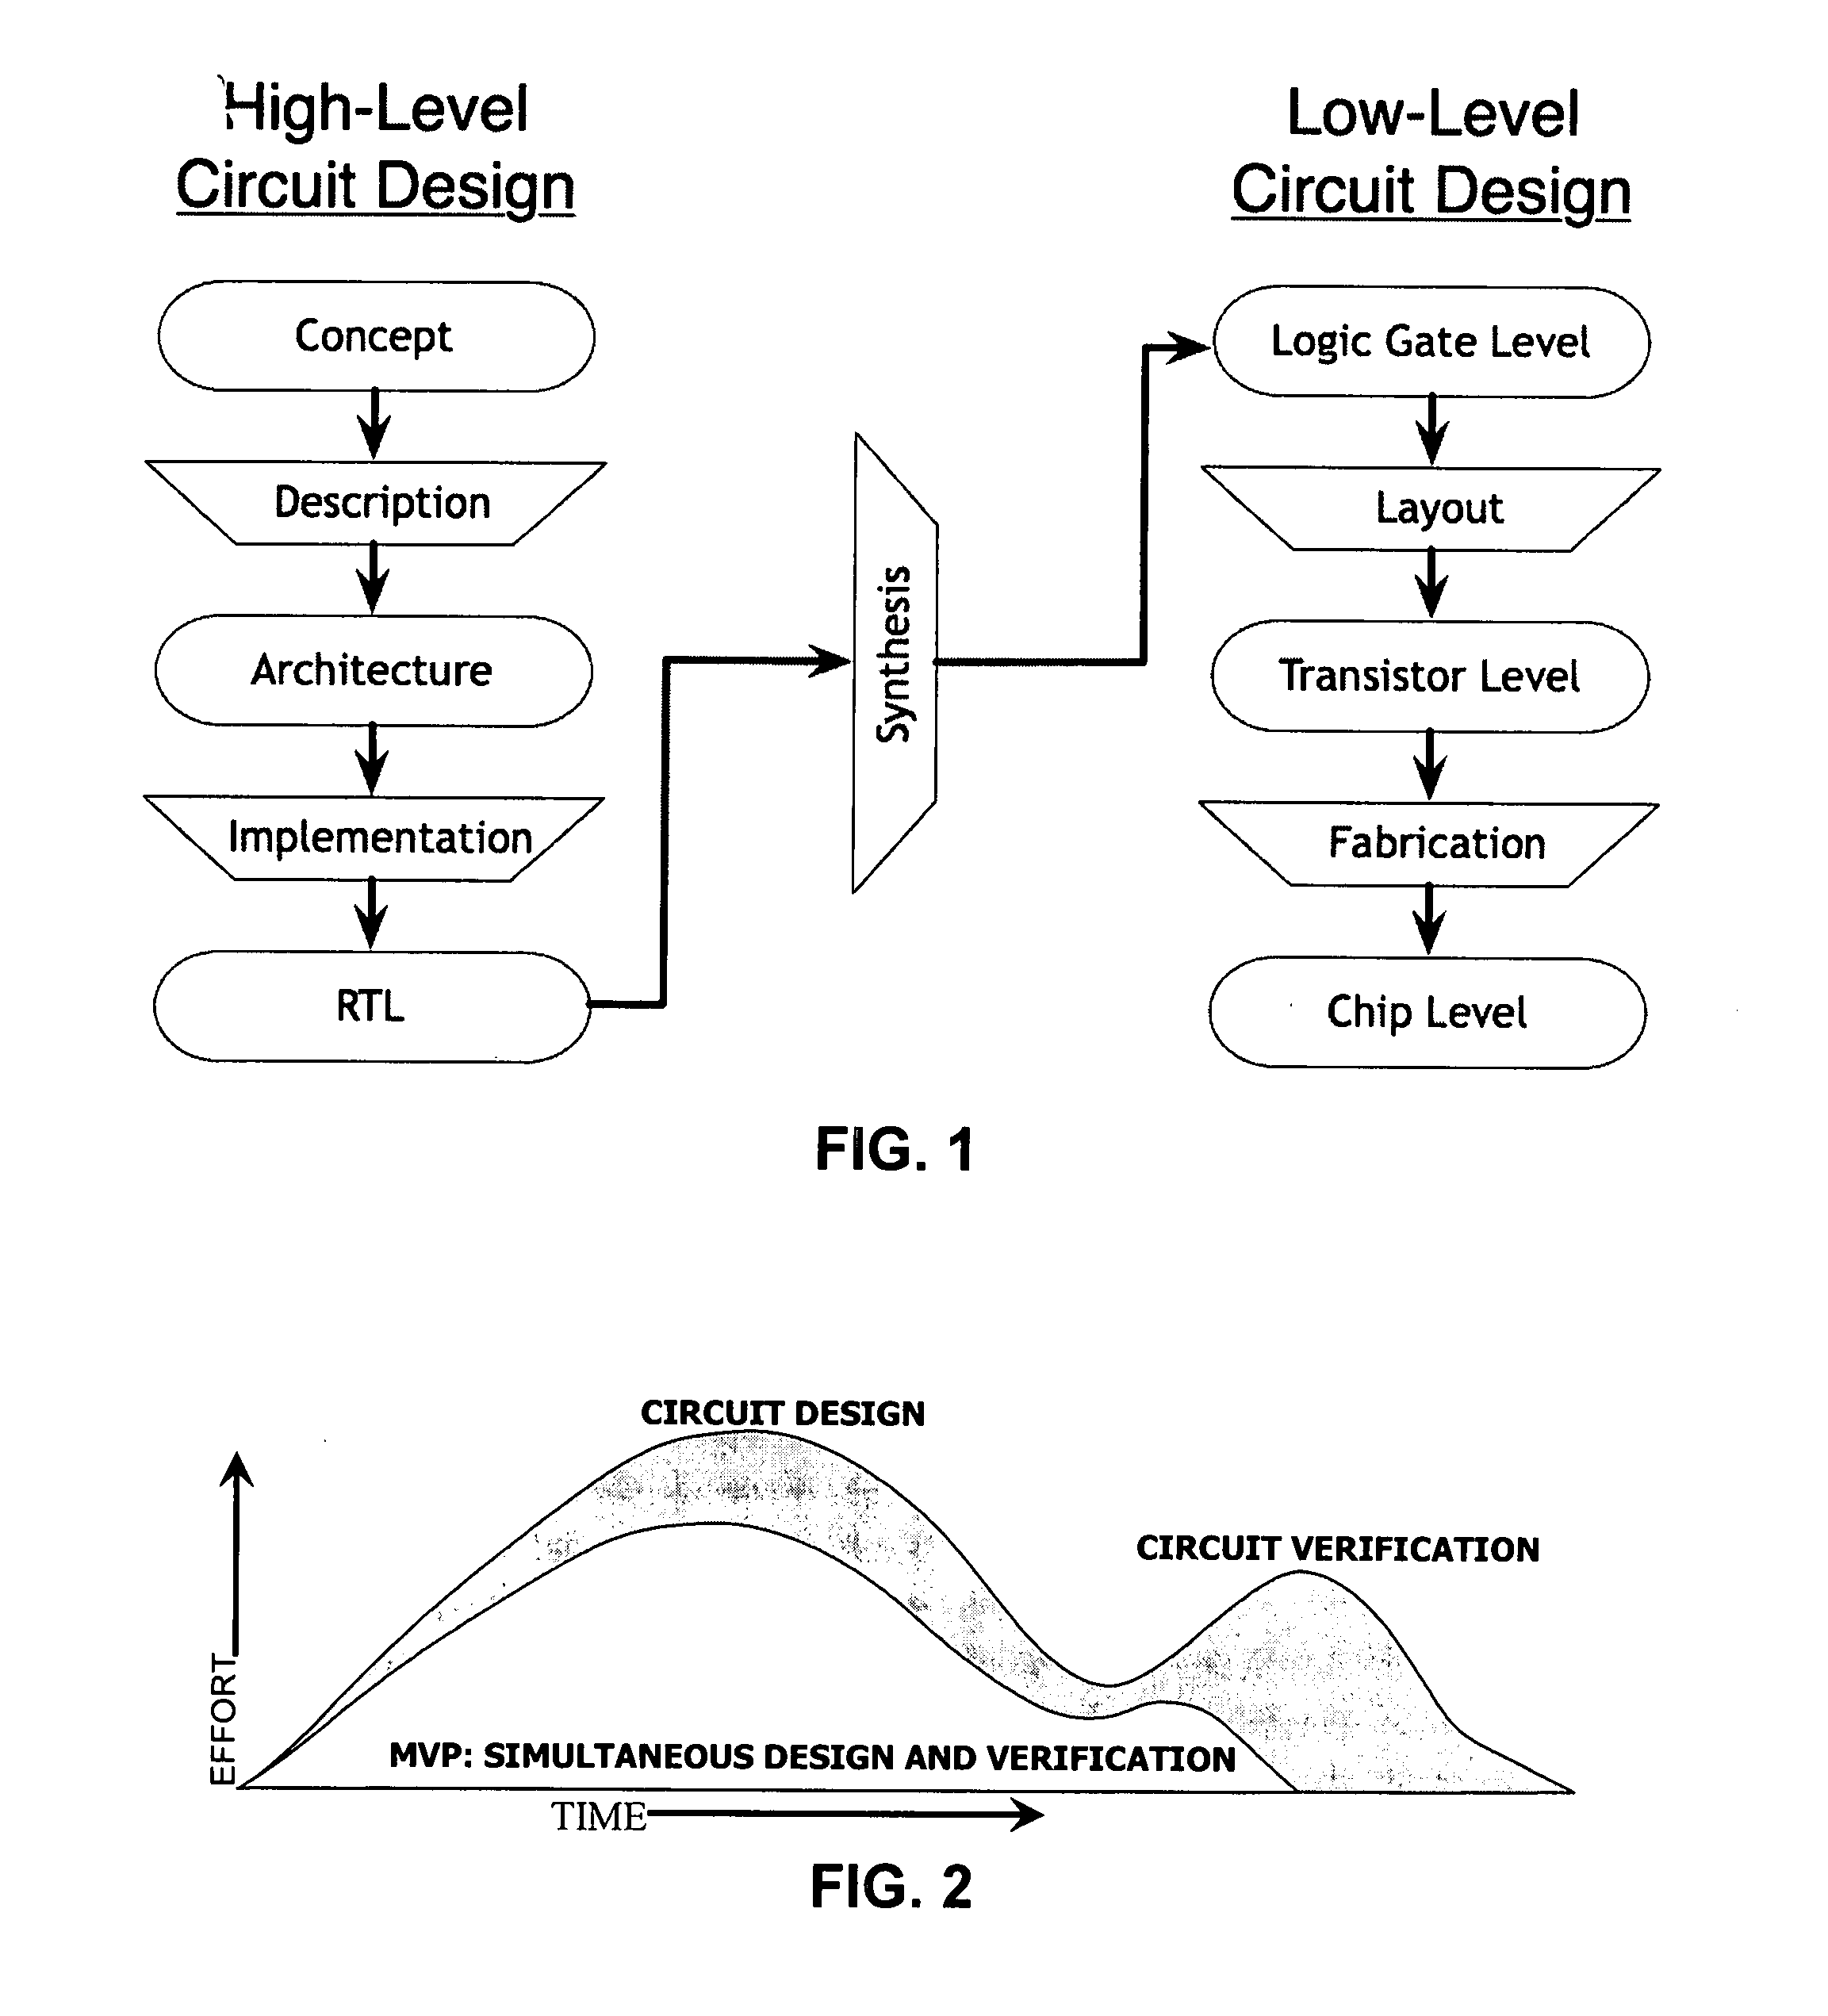 Automatically generating an input sequence for a circuit design using mutant-based verification